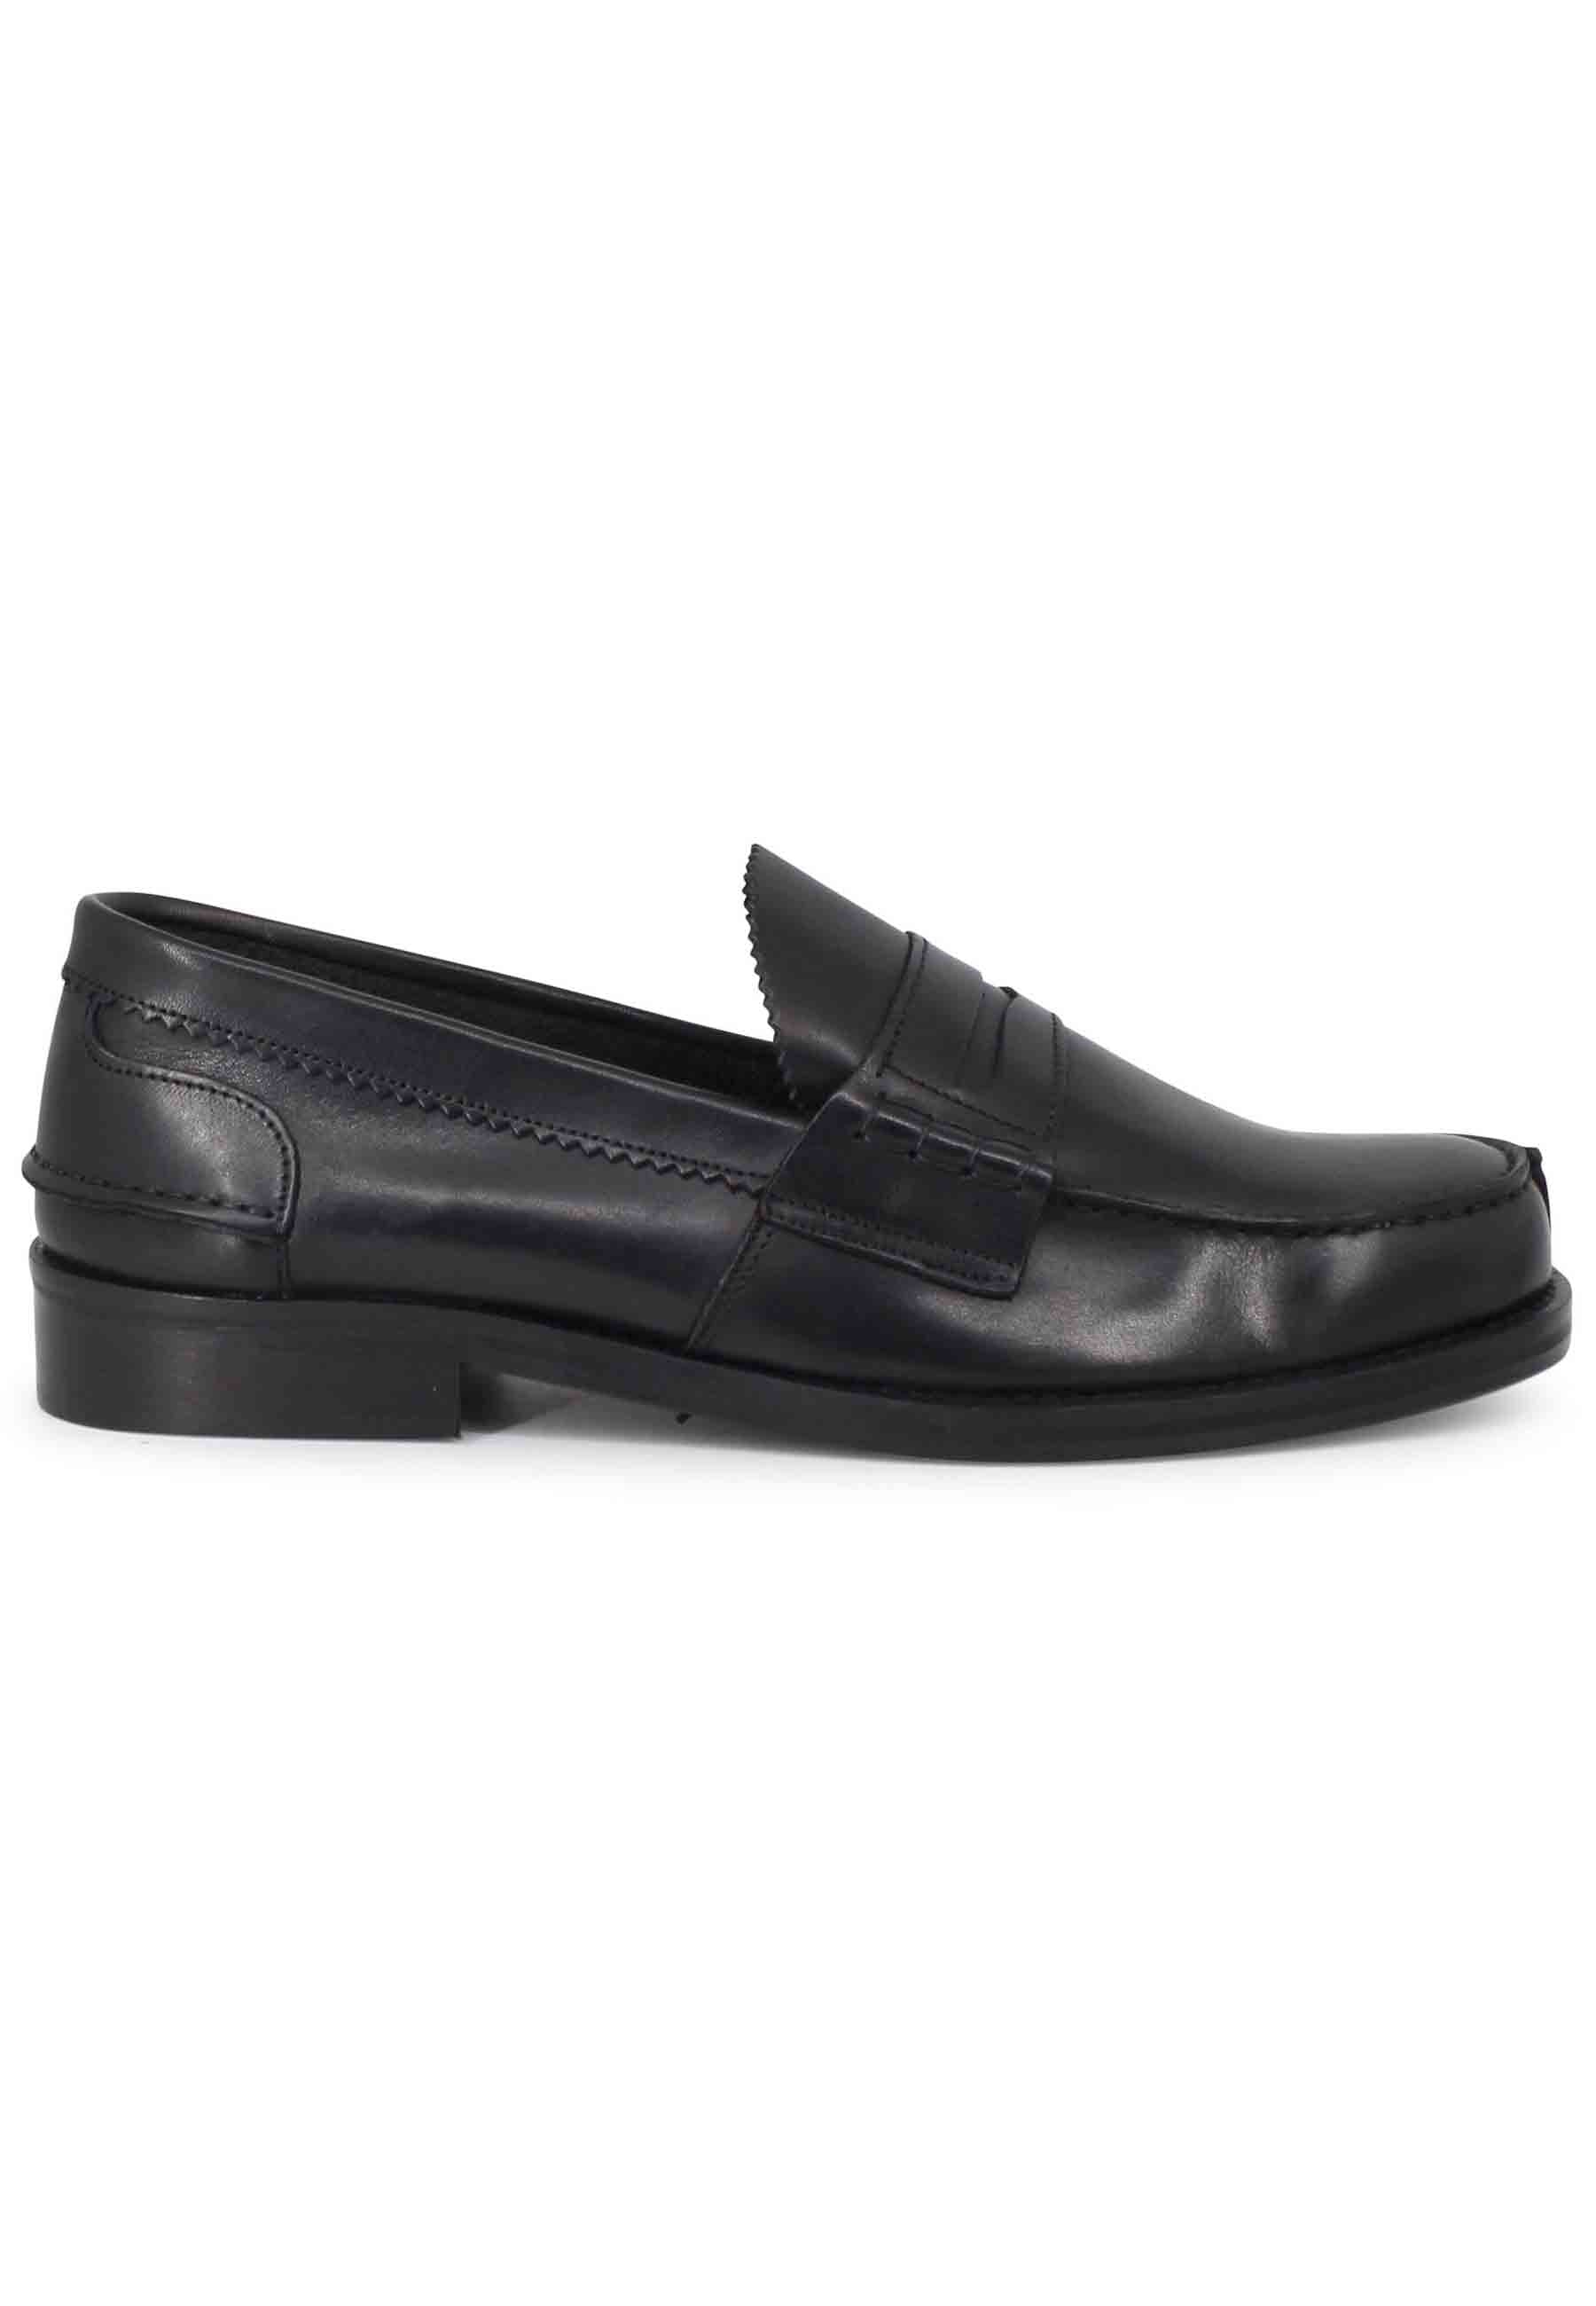 Men's moccasins in black leather and leather sole